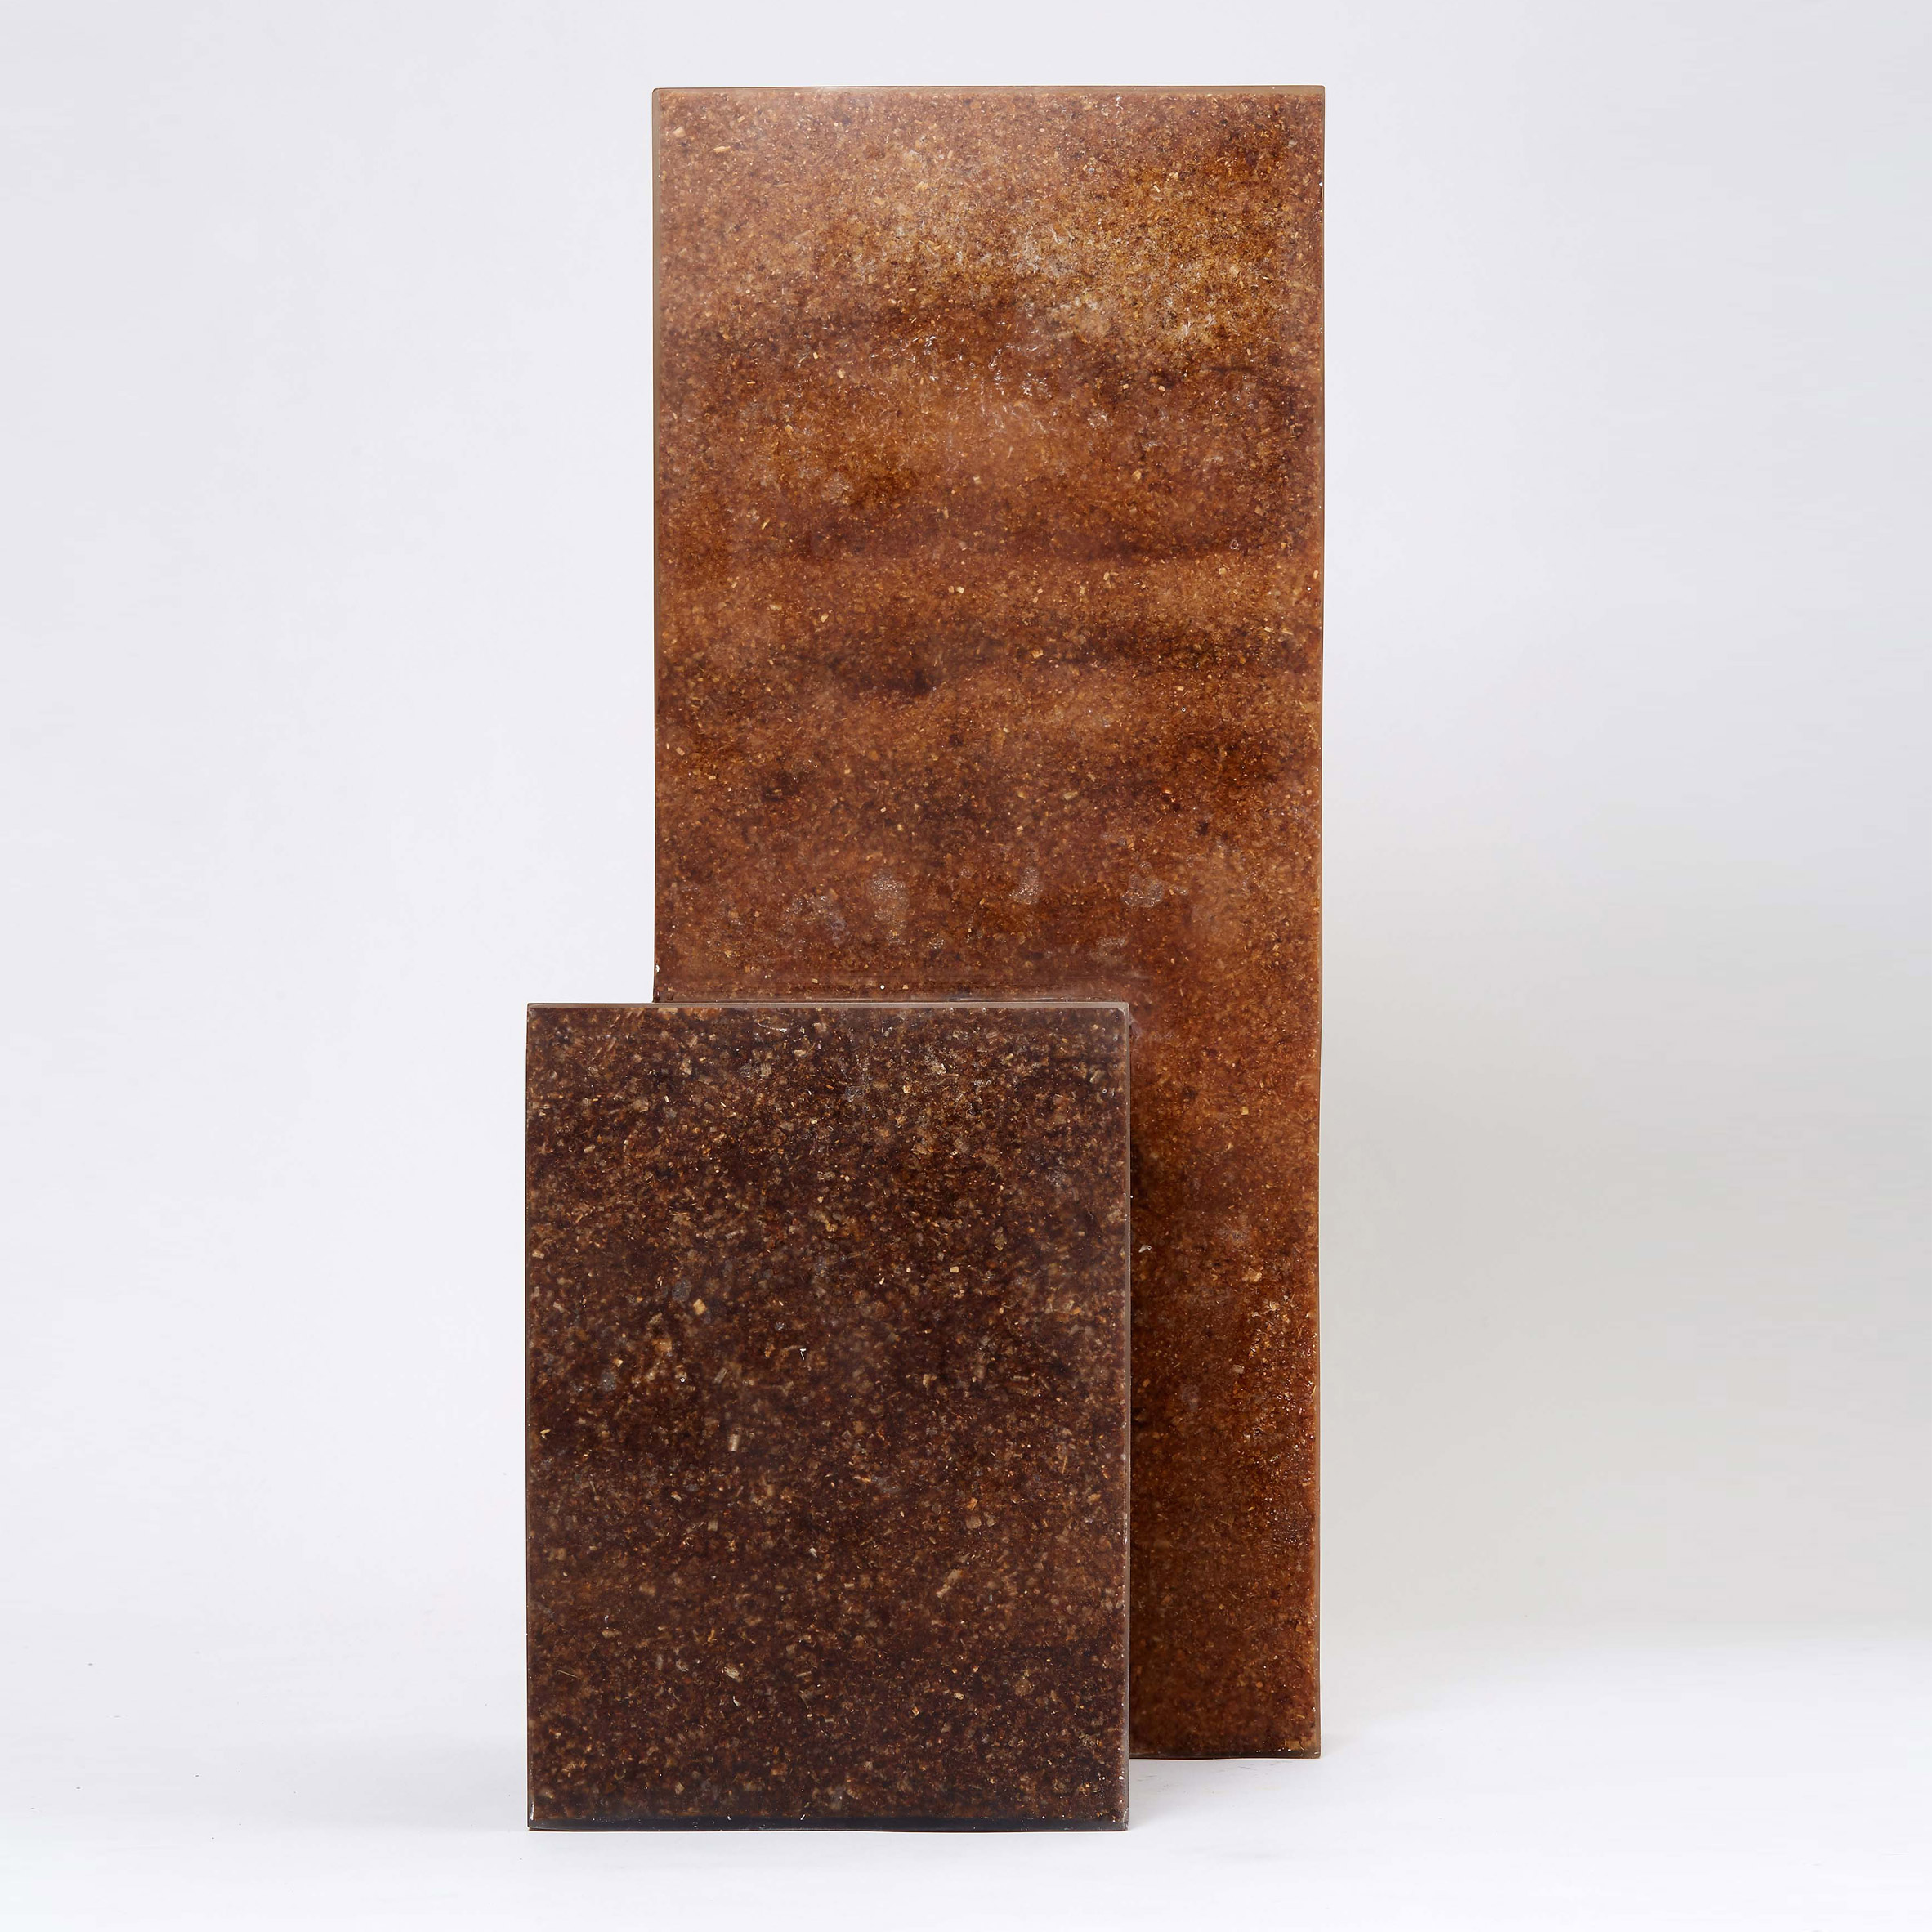 Sawdust and Resin chair by Oh Geon